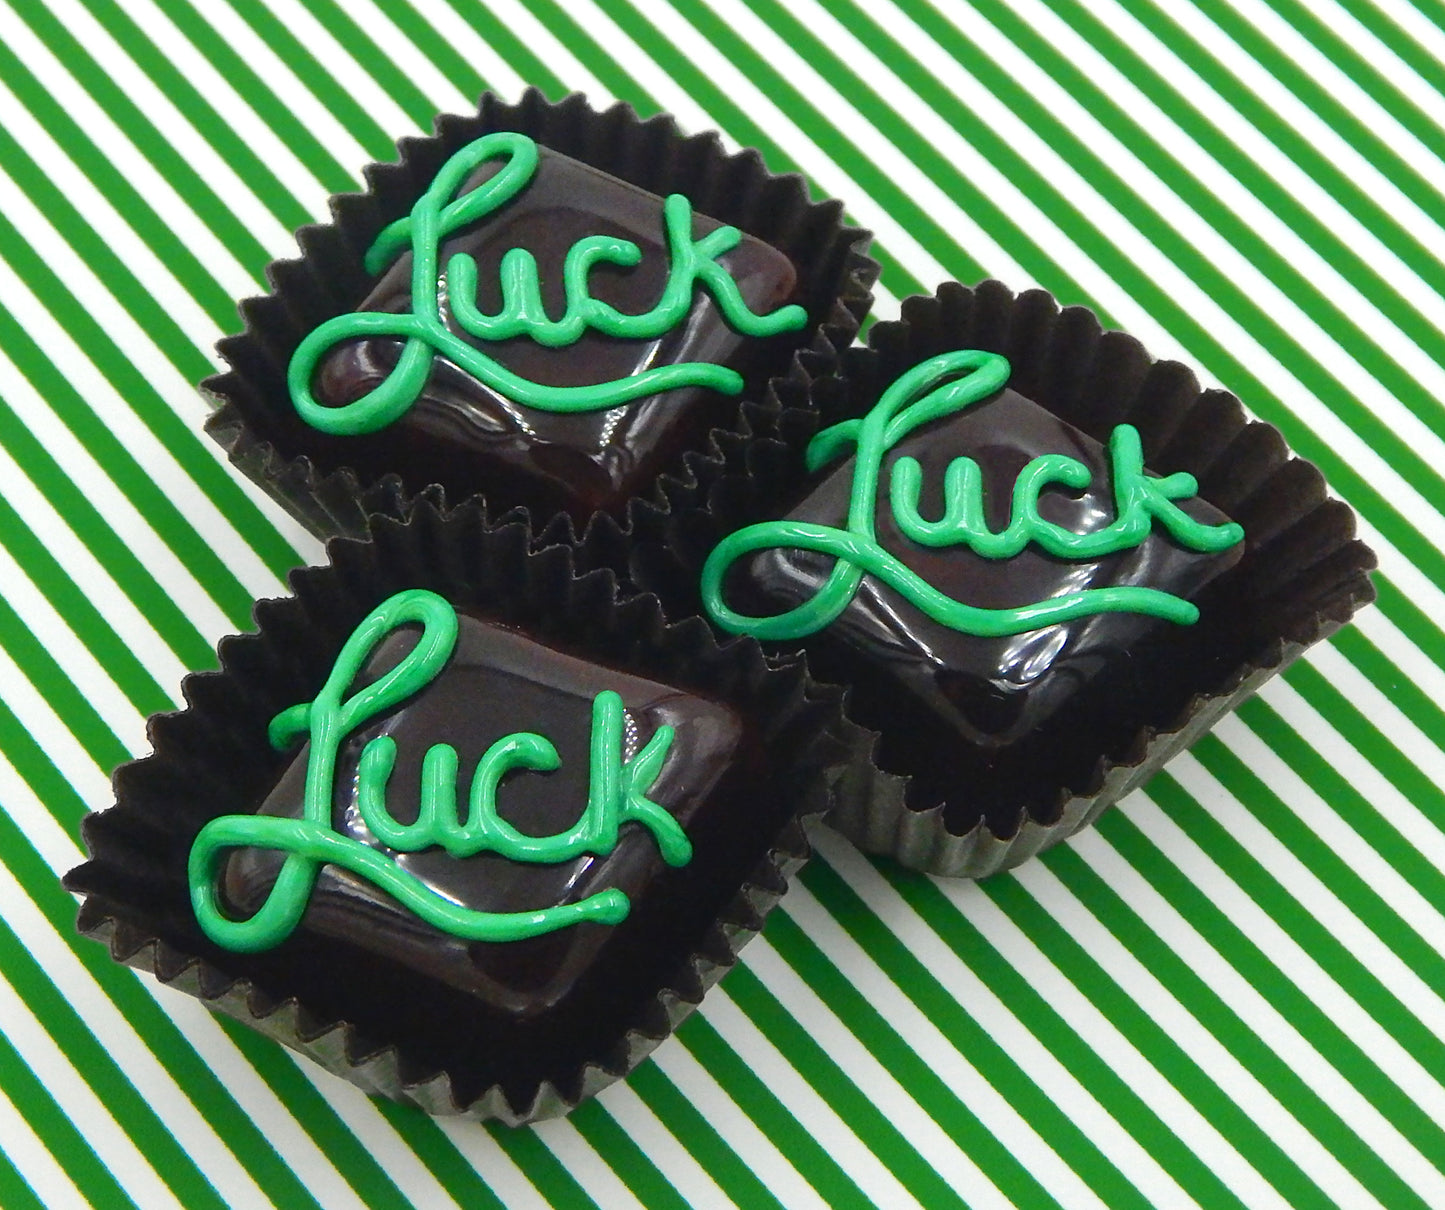 Chocolate with St. Patrick's Day "Luck" (17-080CN)